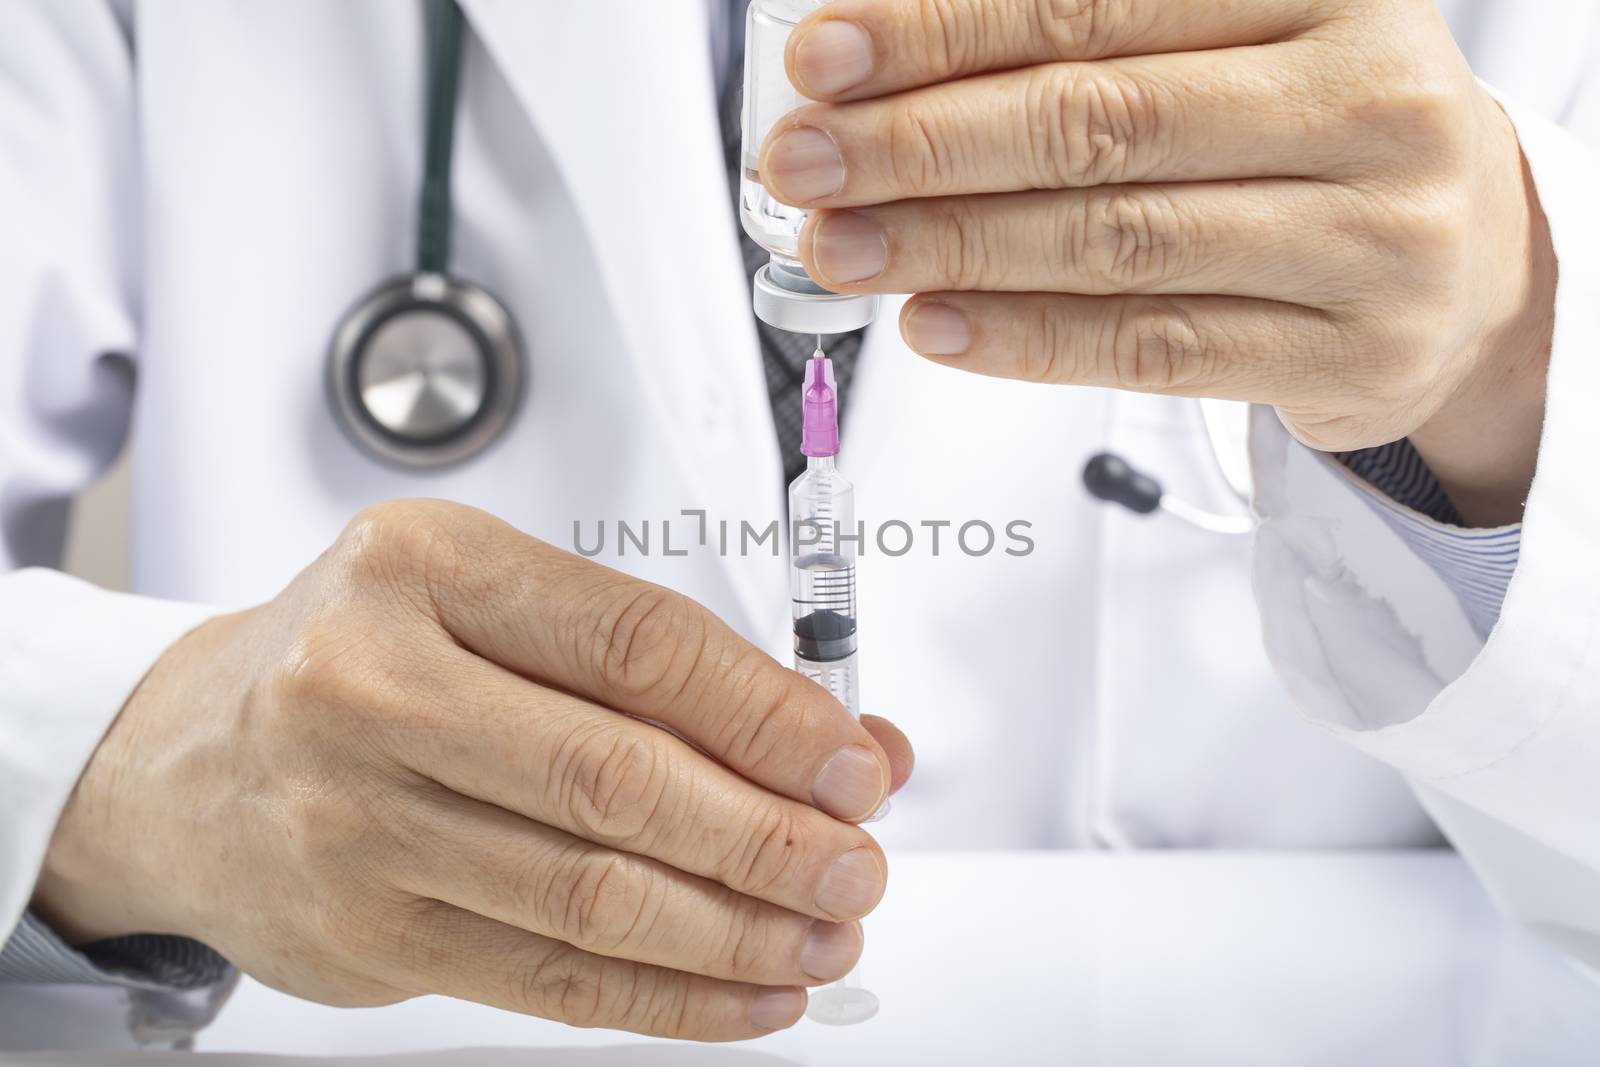 A male doctor using a syringe to draw fluid or vaccine from a vial. Medication or vaccination administration concept. Covid vaccine concept. Asian ethnicity.